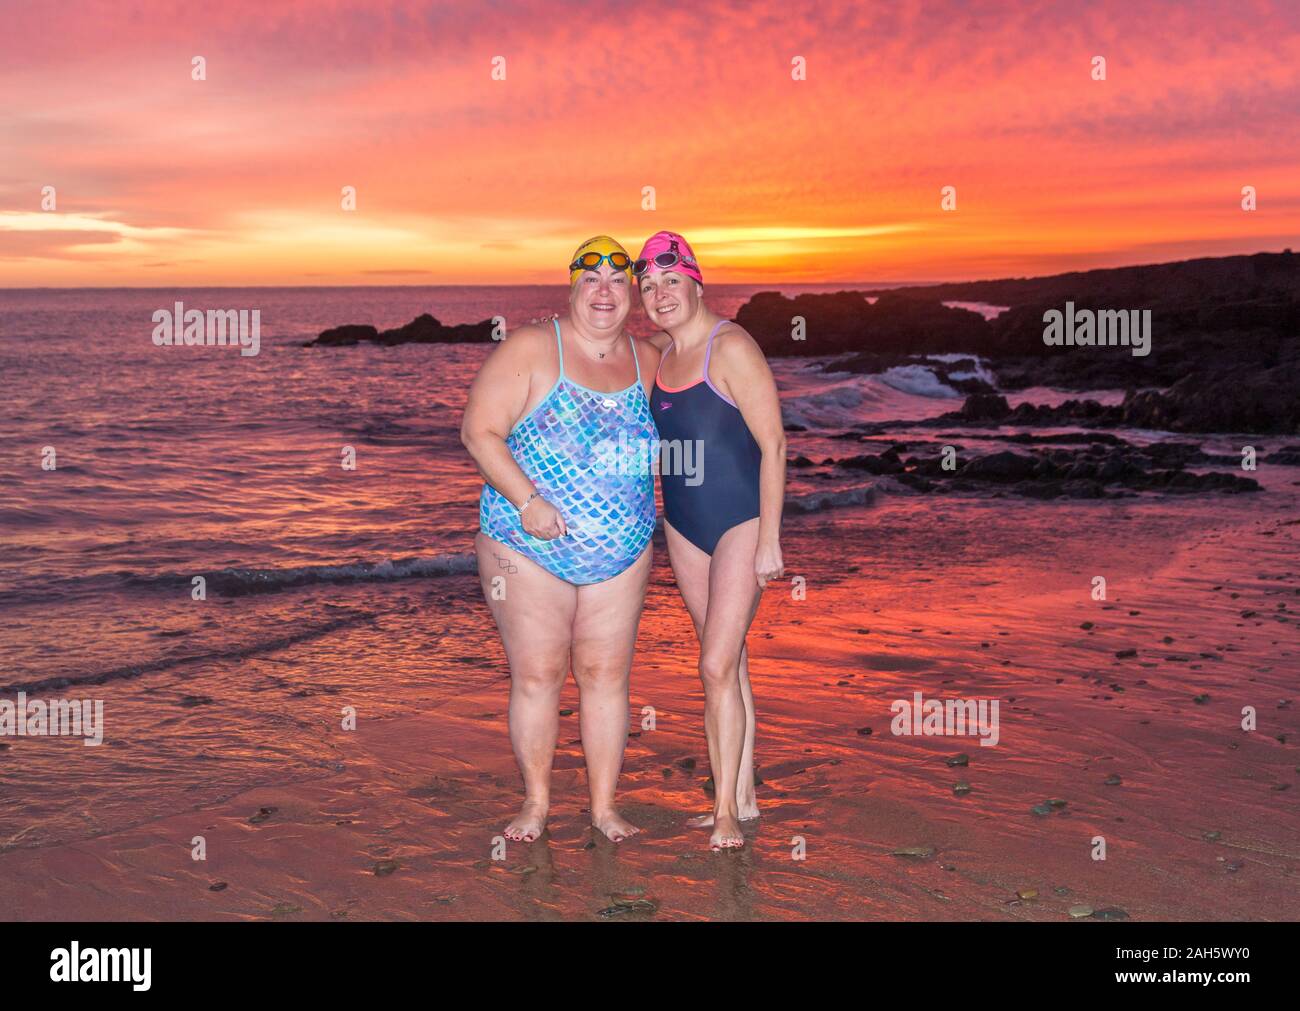 Myrtleville, Cork, Ireland. 25th December, 2019. Marie Watson, Carrigaline and Brenda Sisk from Tivoli preparing to go in for an early morning Christmas Day swim before dawn at Myrtleville, Co. Cork, Ireland.- Credit; David Creedon / Alamy Live News Stock Photo